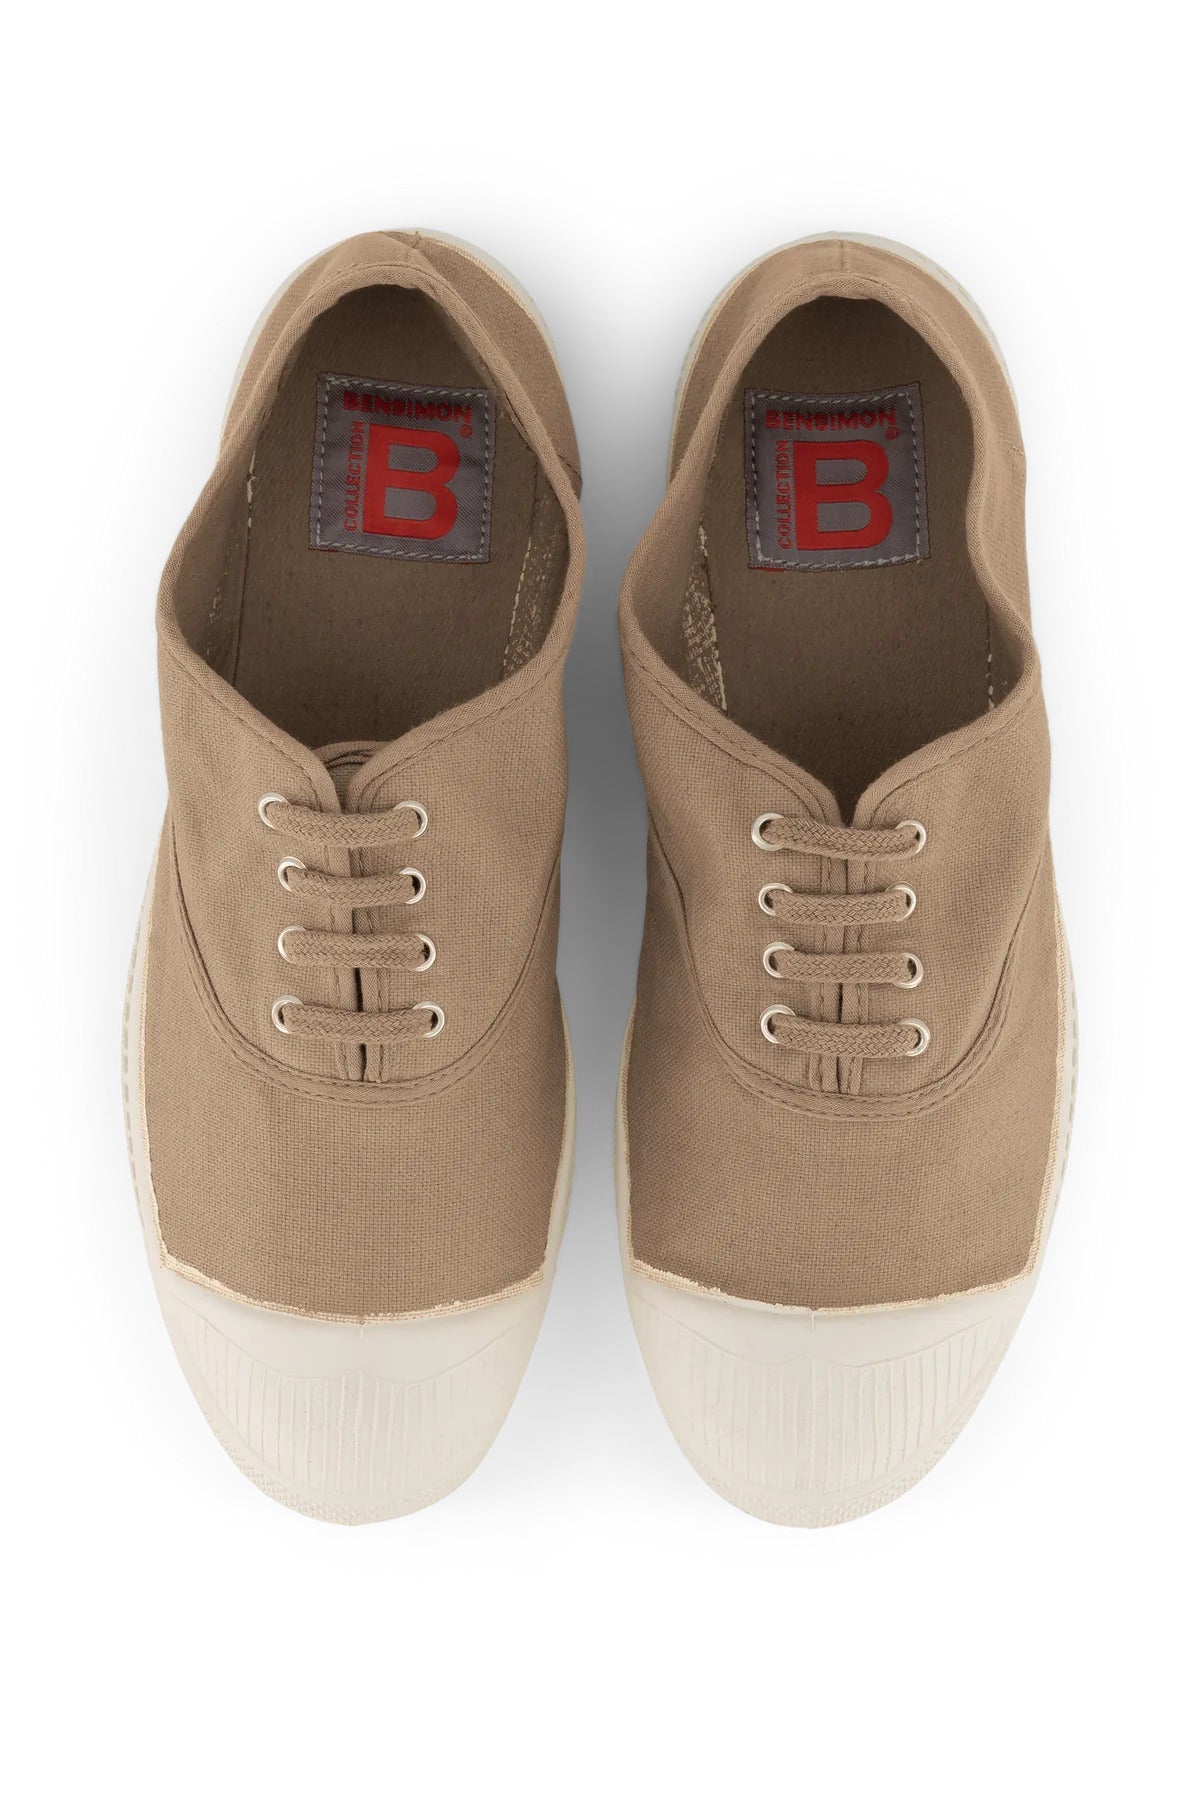 Bensimon Tennis Lacet – Muse For